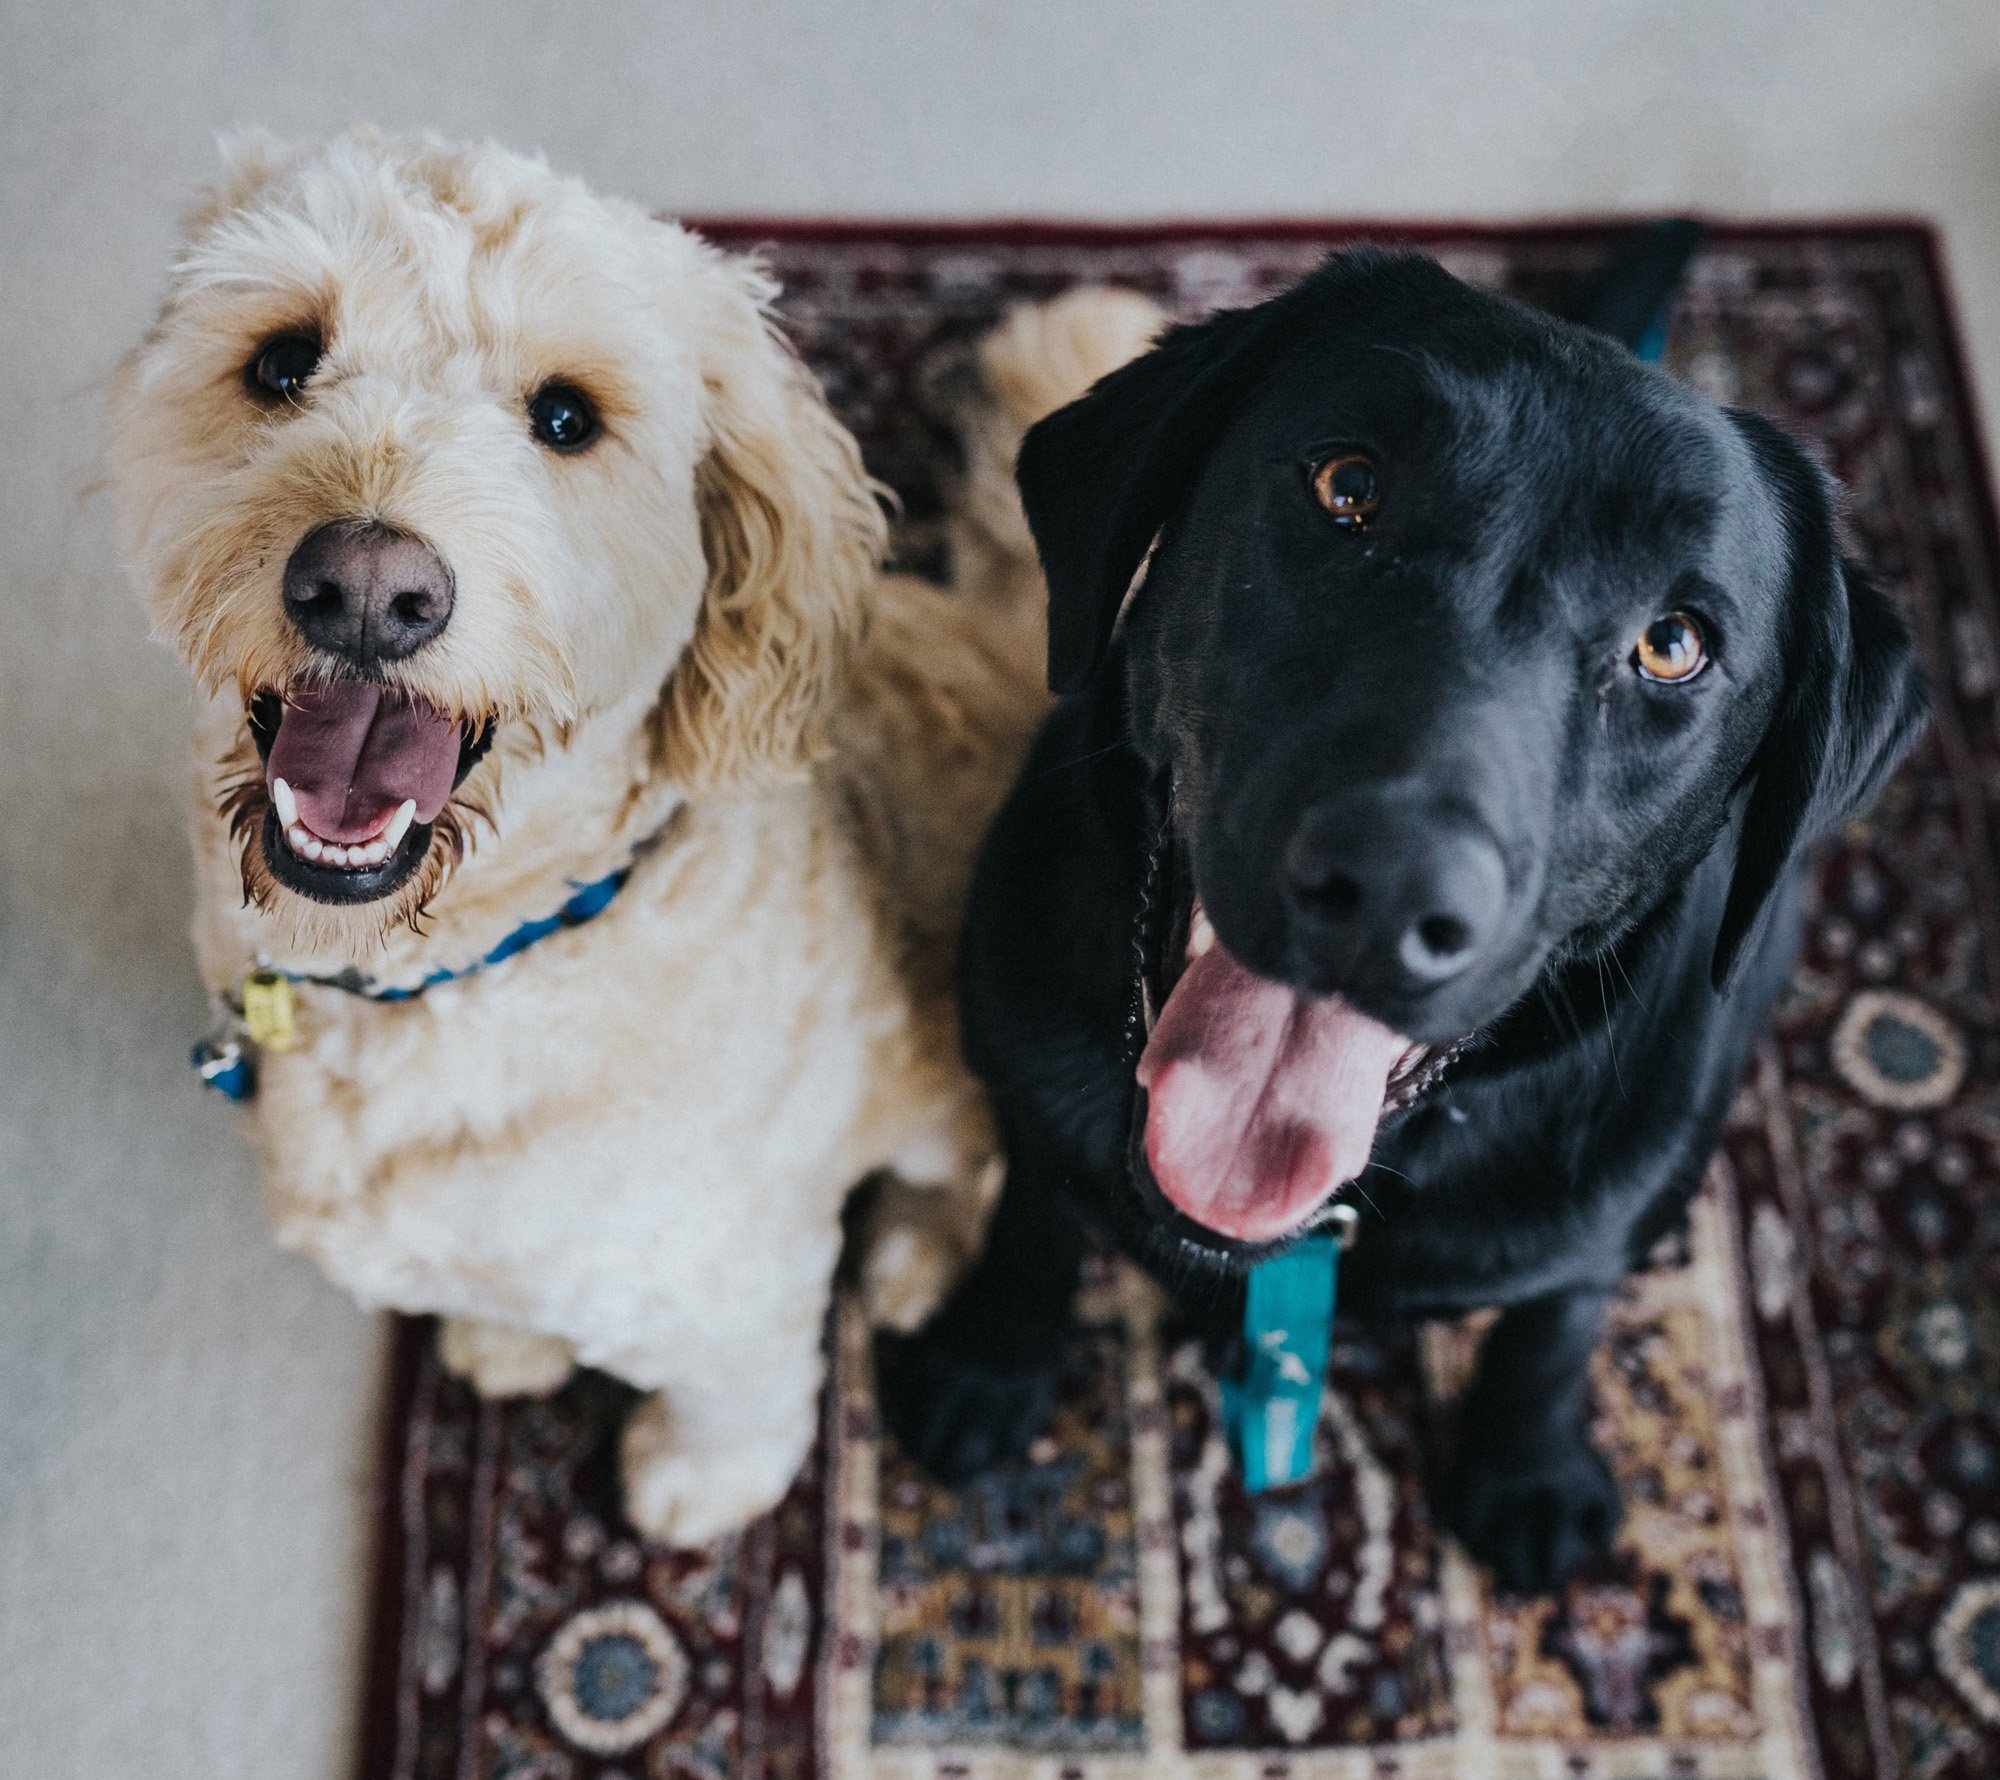 https://imagedelivery.net/ExKHvoWzpvFxpqockAGXOw/images/blog/2020/04/Dogs-sitting-on-pet-friendly-rug.jpg/fit=crop,width=2000